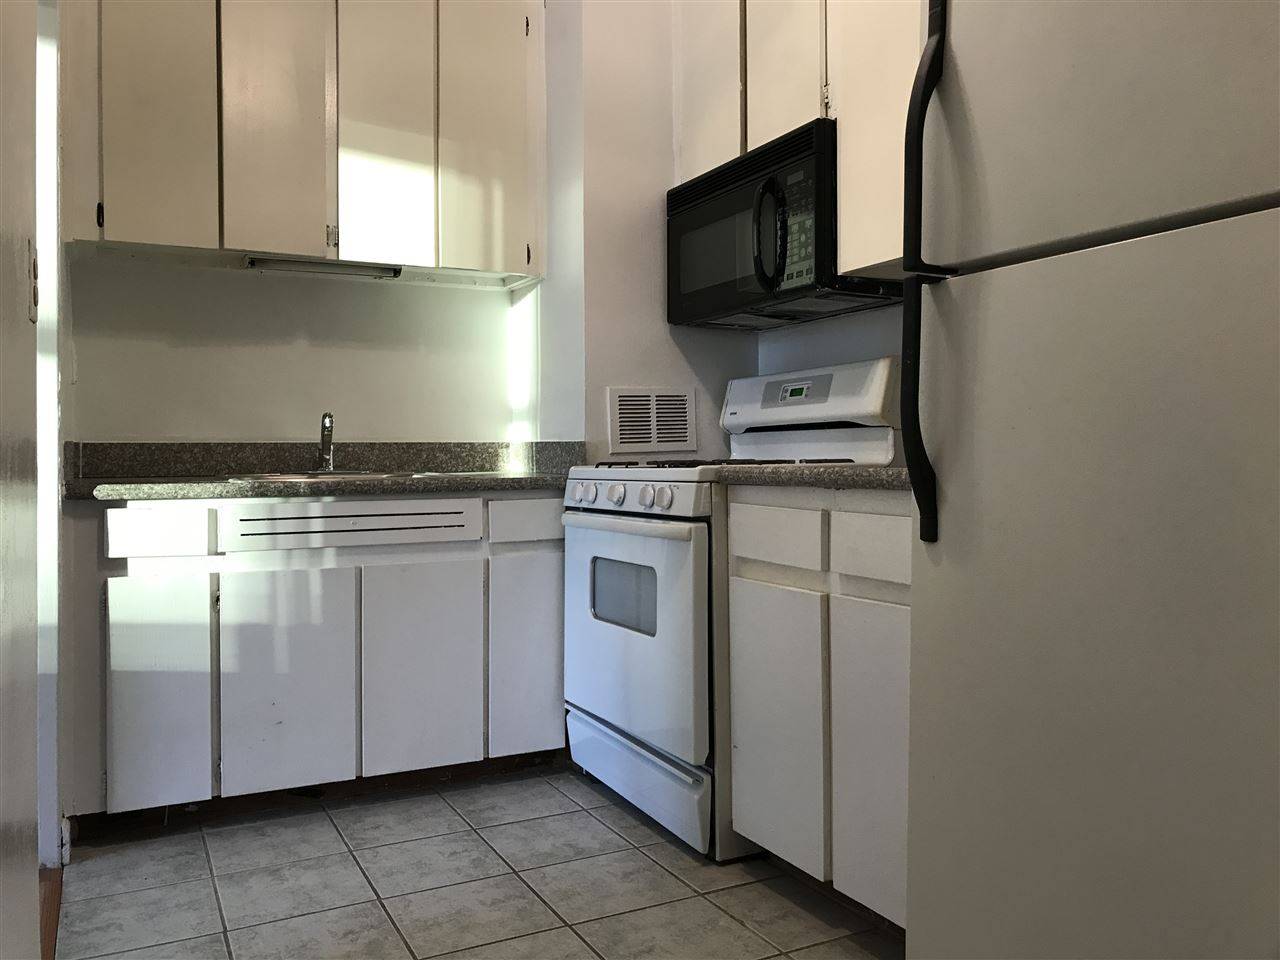 This Metropolis rental offers a uniquely located living space for those interested in enjoying some of the perks of Downtown Jersey City